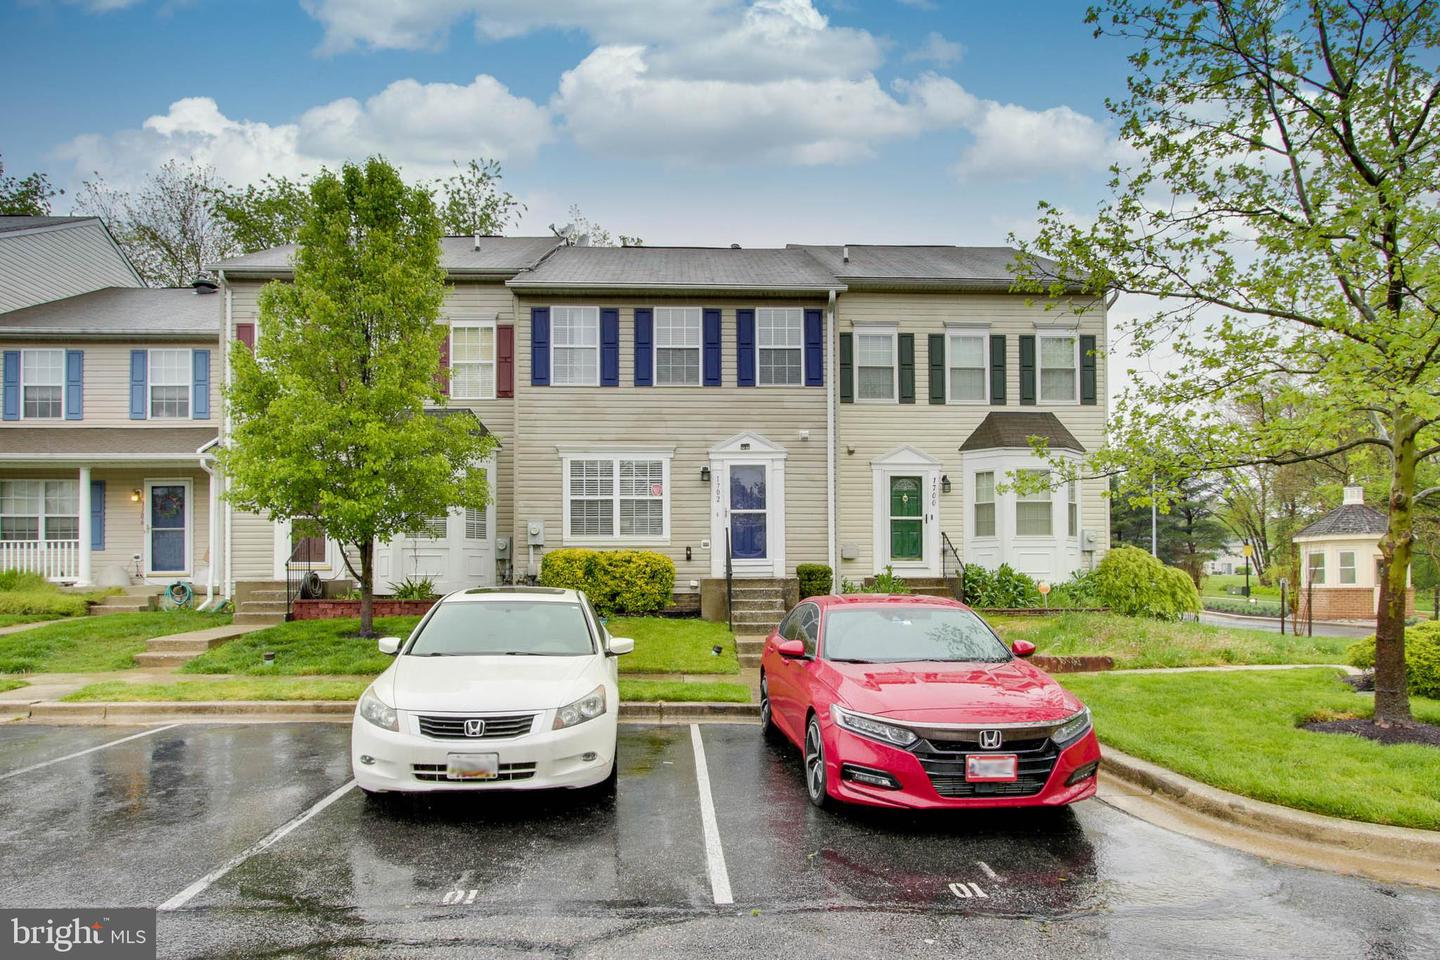 View Severn, MD 21144 townhome